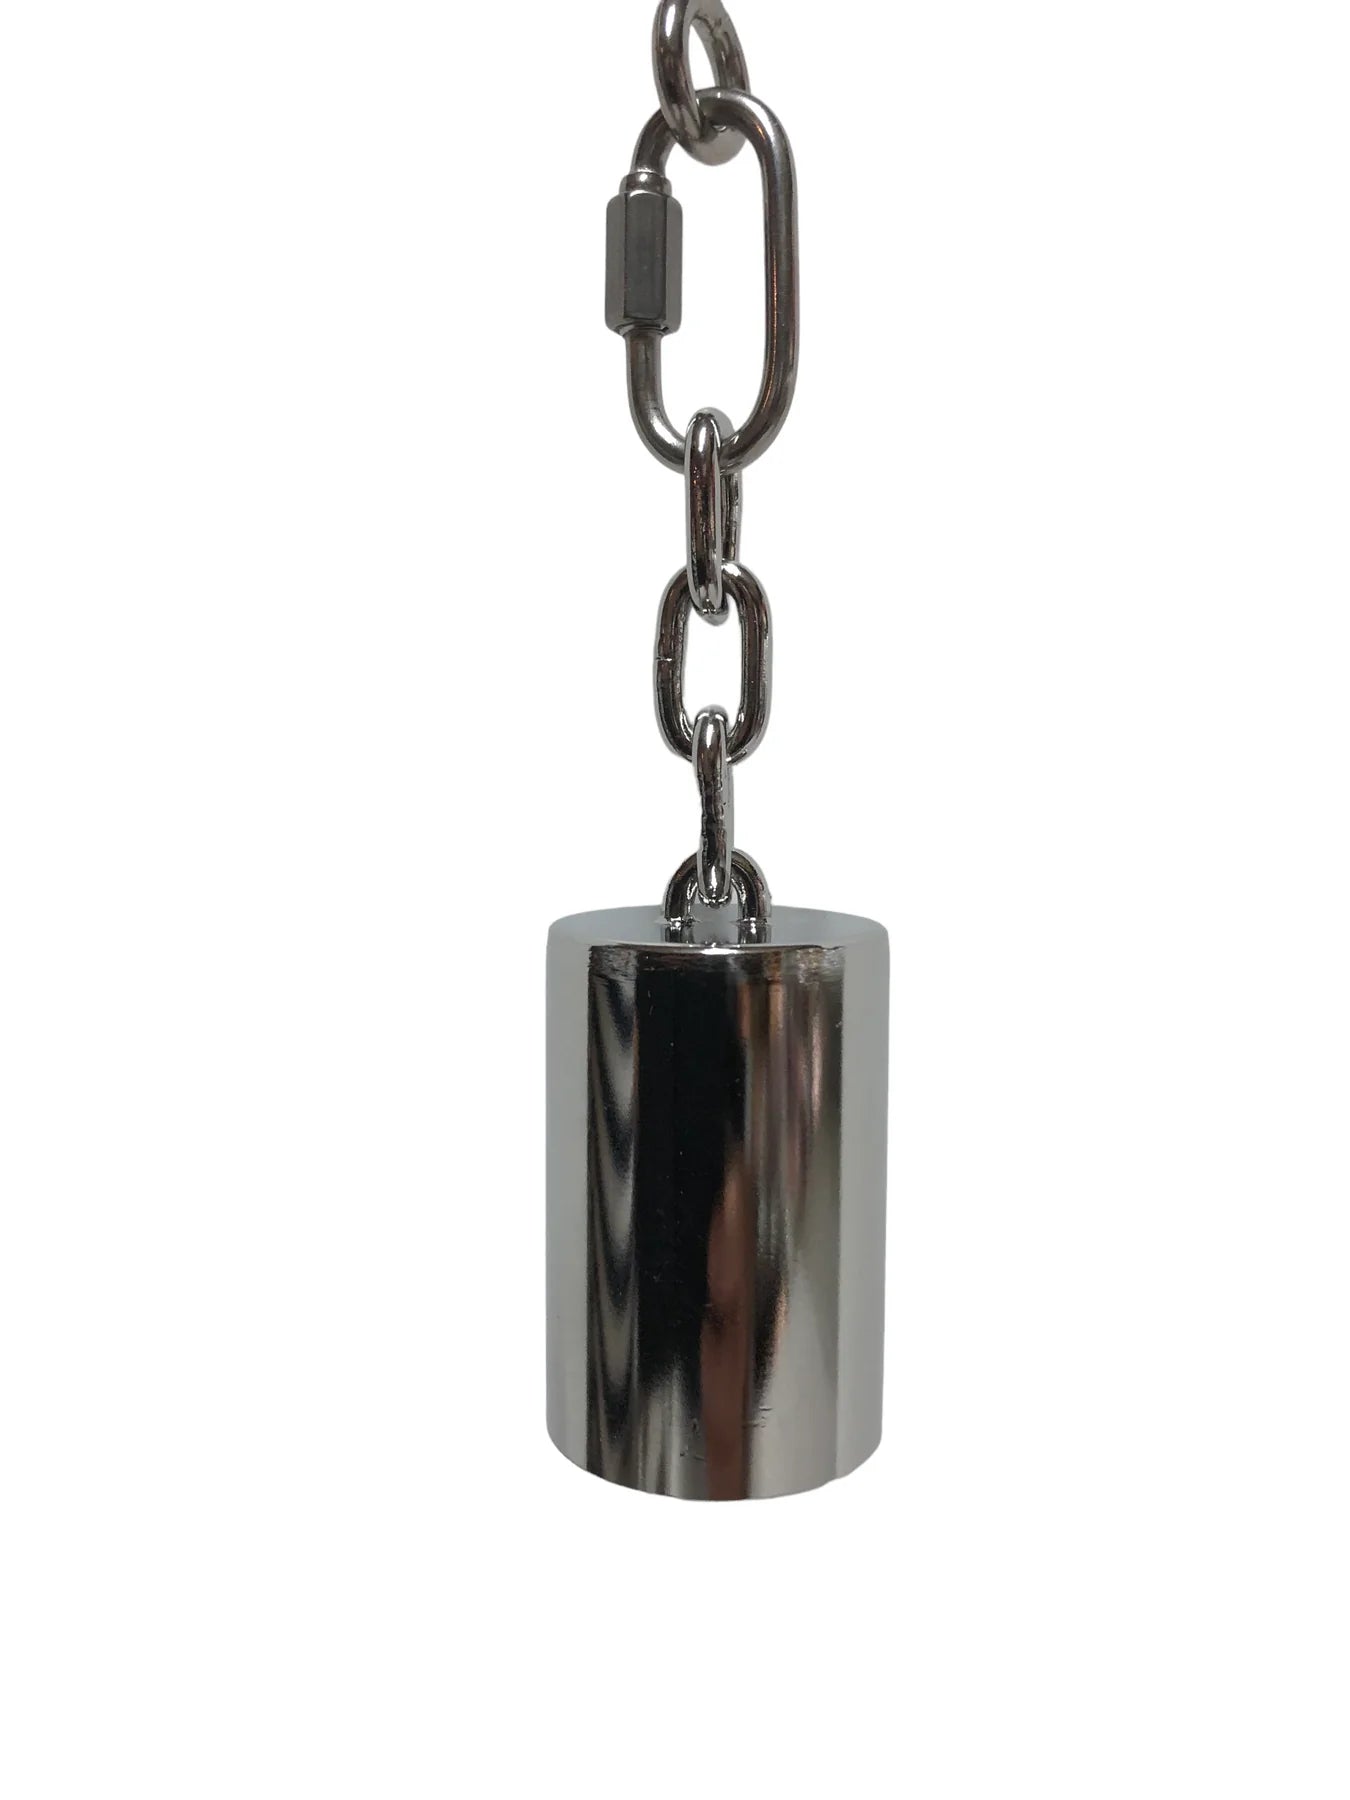 Foraging Parrot Stainless Steel Bell from Foraging Parrot